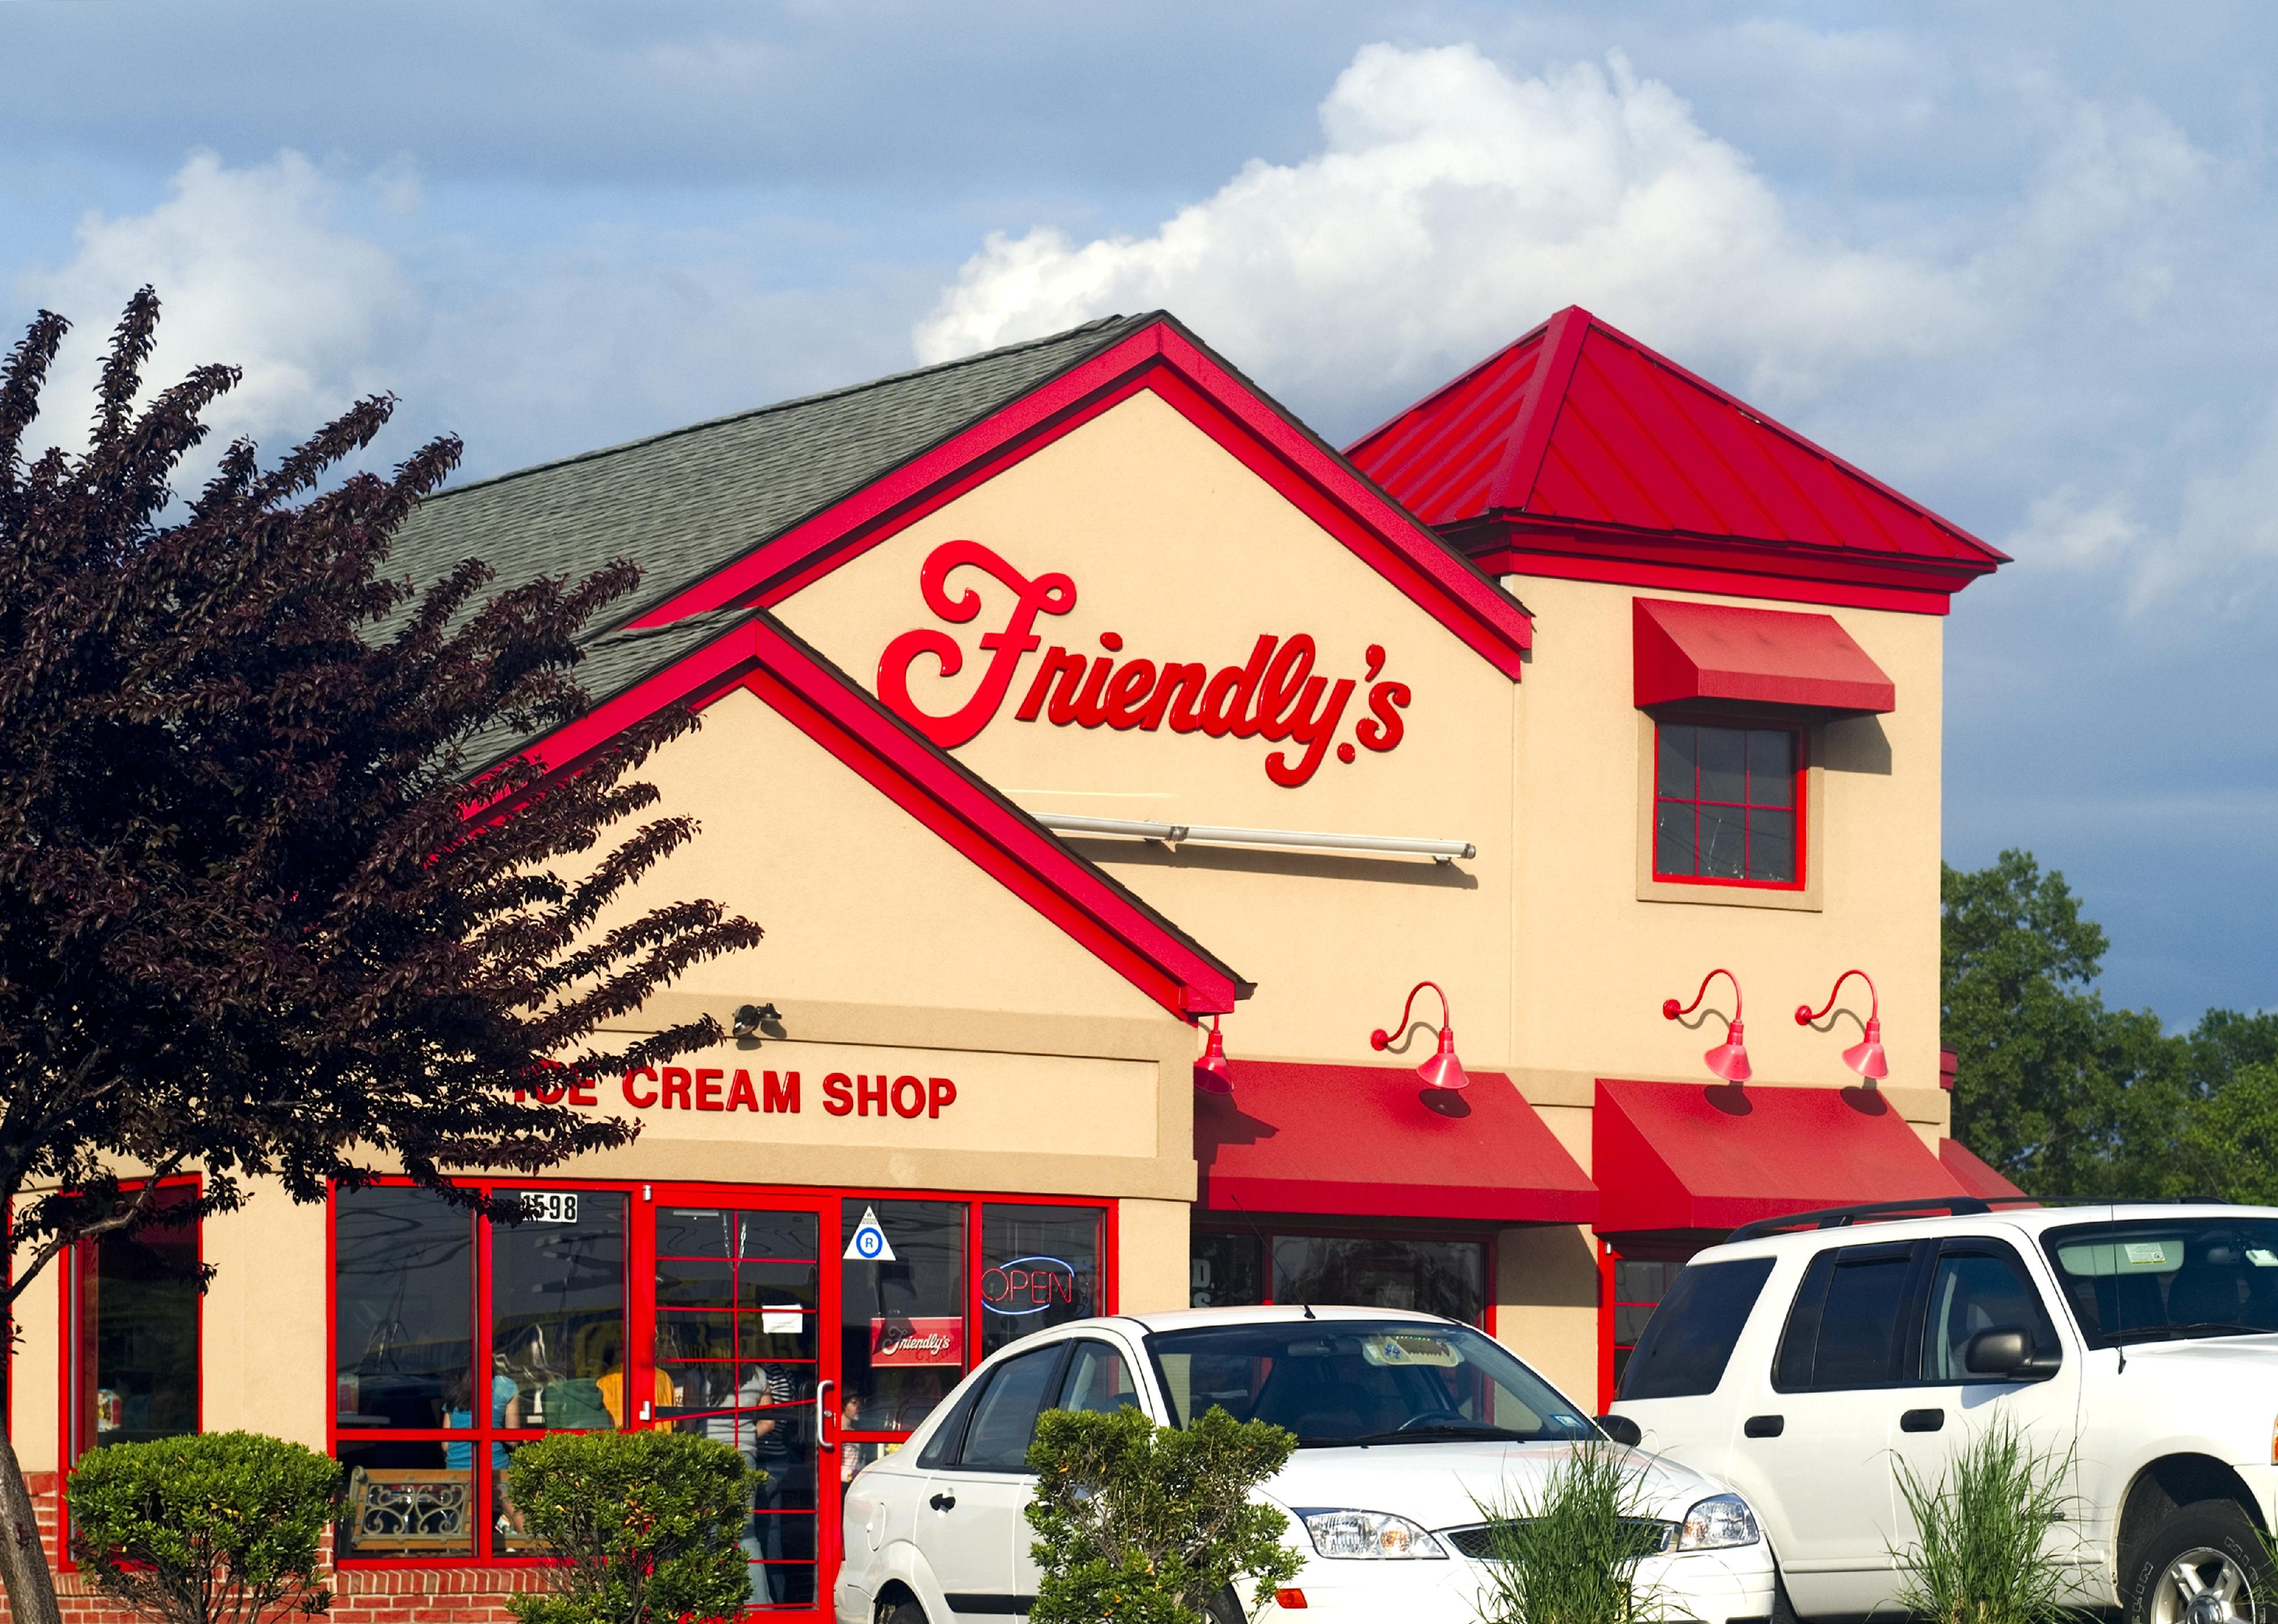 The exterior of a Friendly's restaurant.